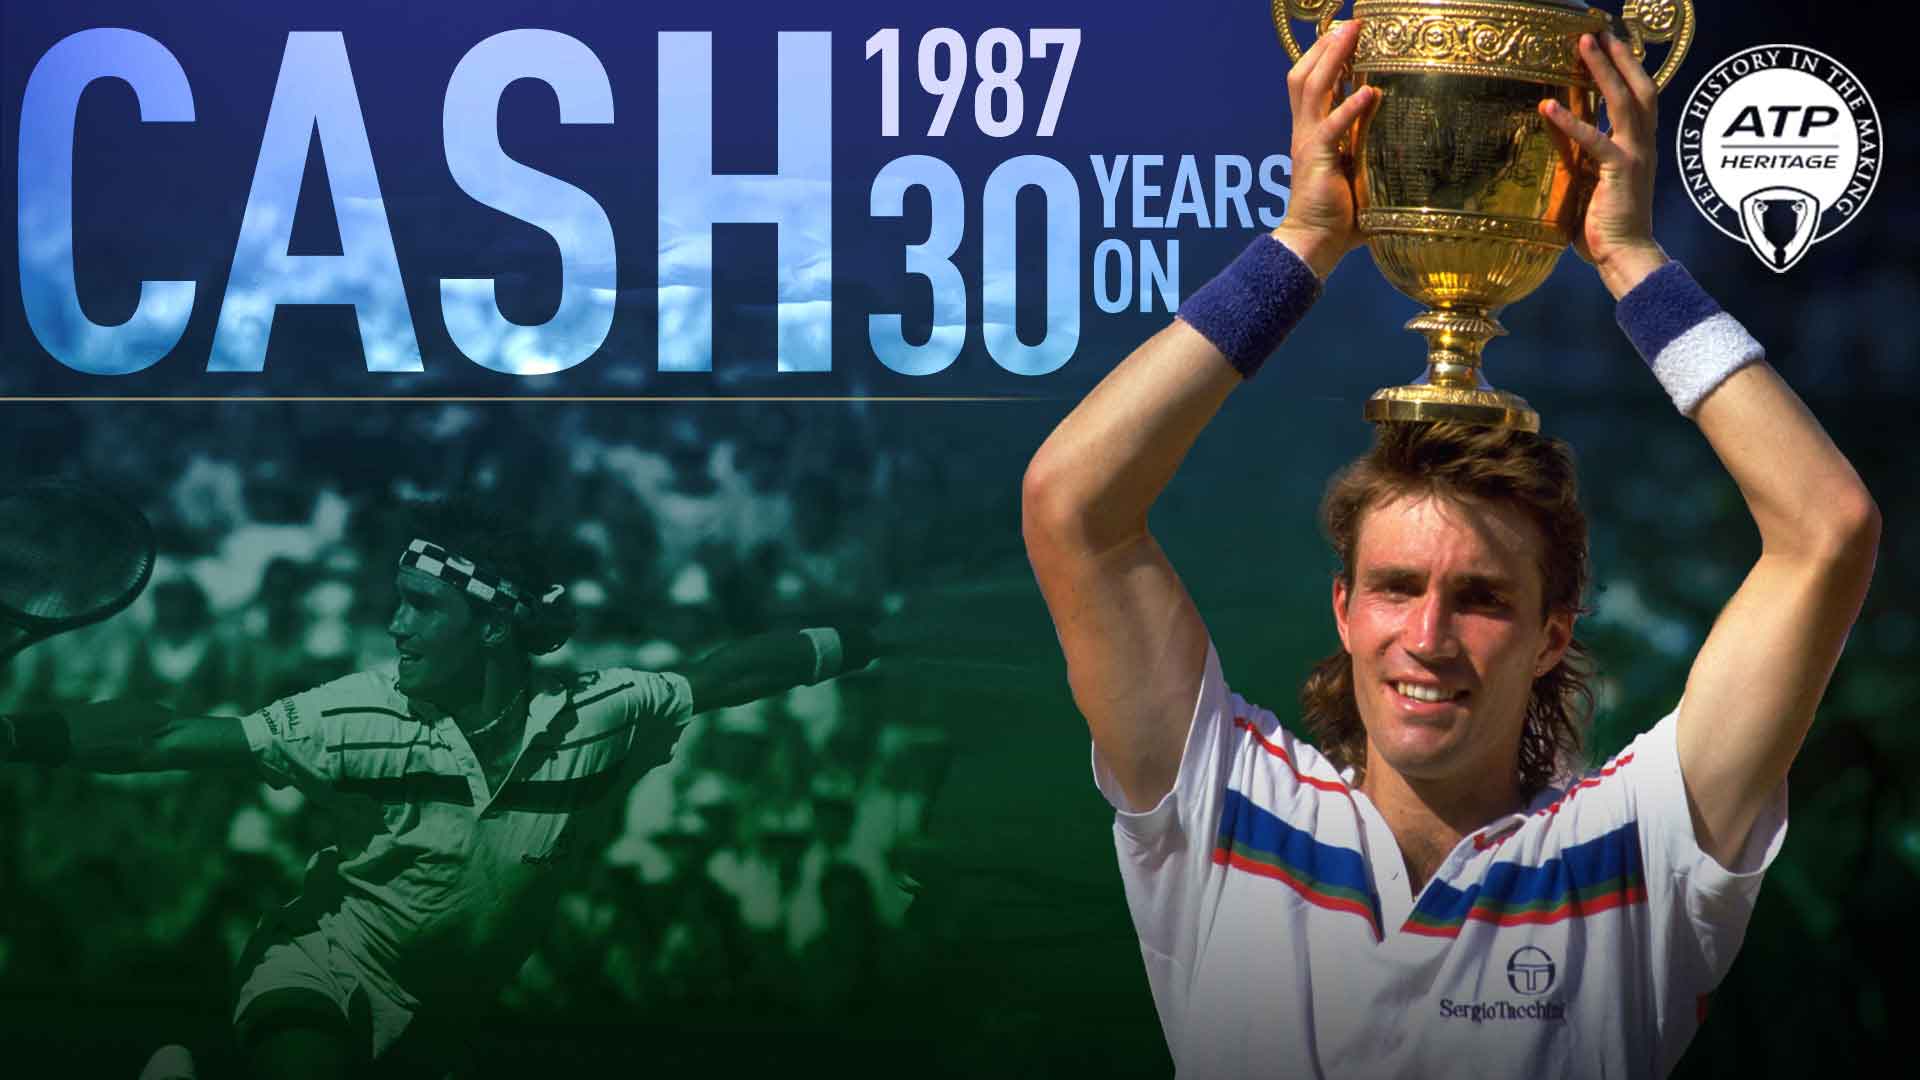 On Sunday, 5 July 1987, Pat Cash beat World No. 1 Ivan Lendl for the title at The Championships, Wimbledon.